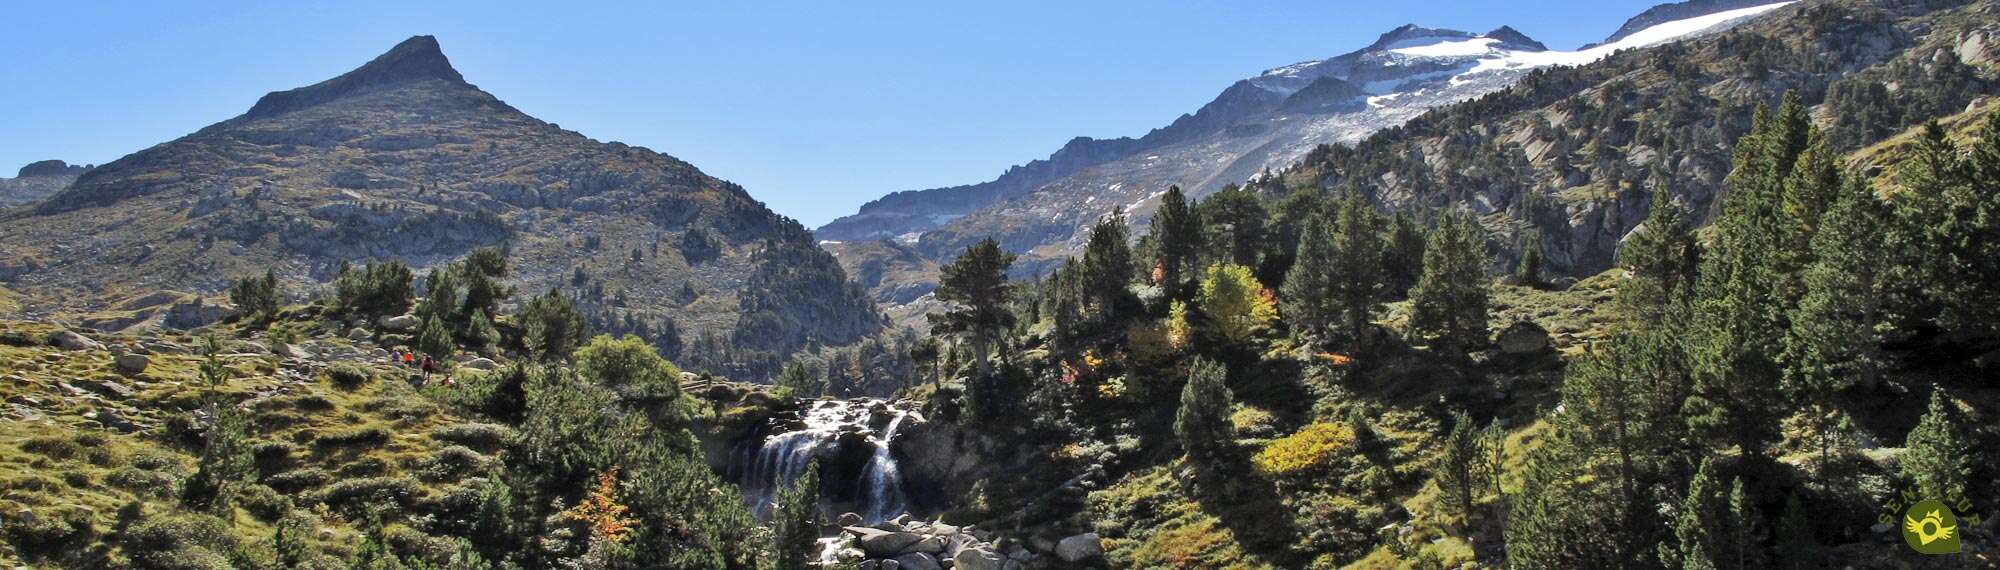 The Pyrenees